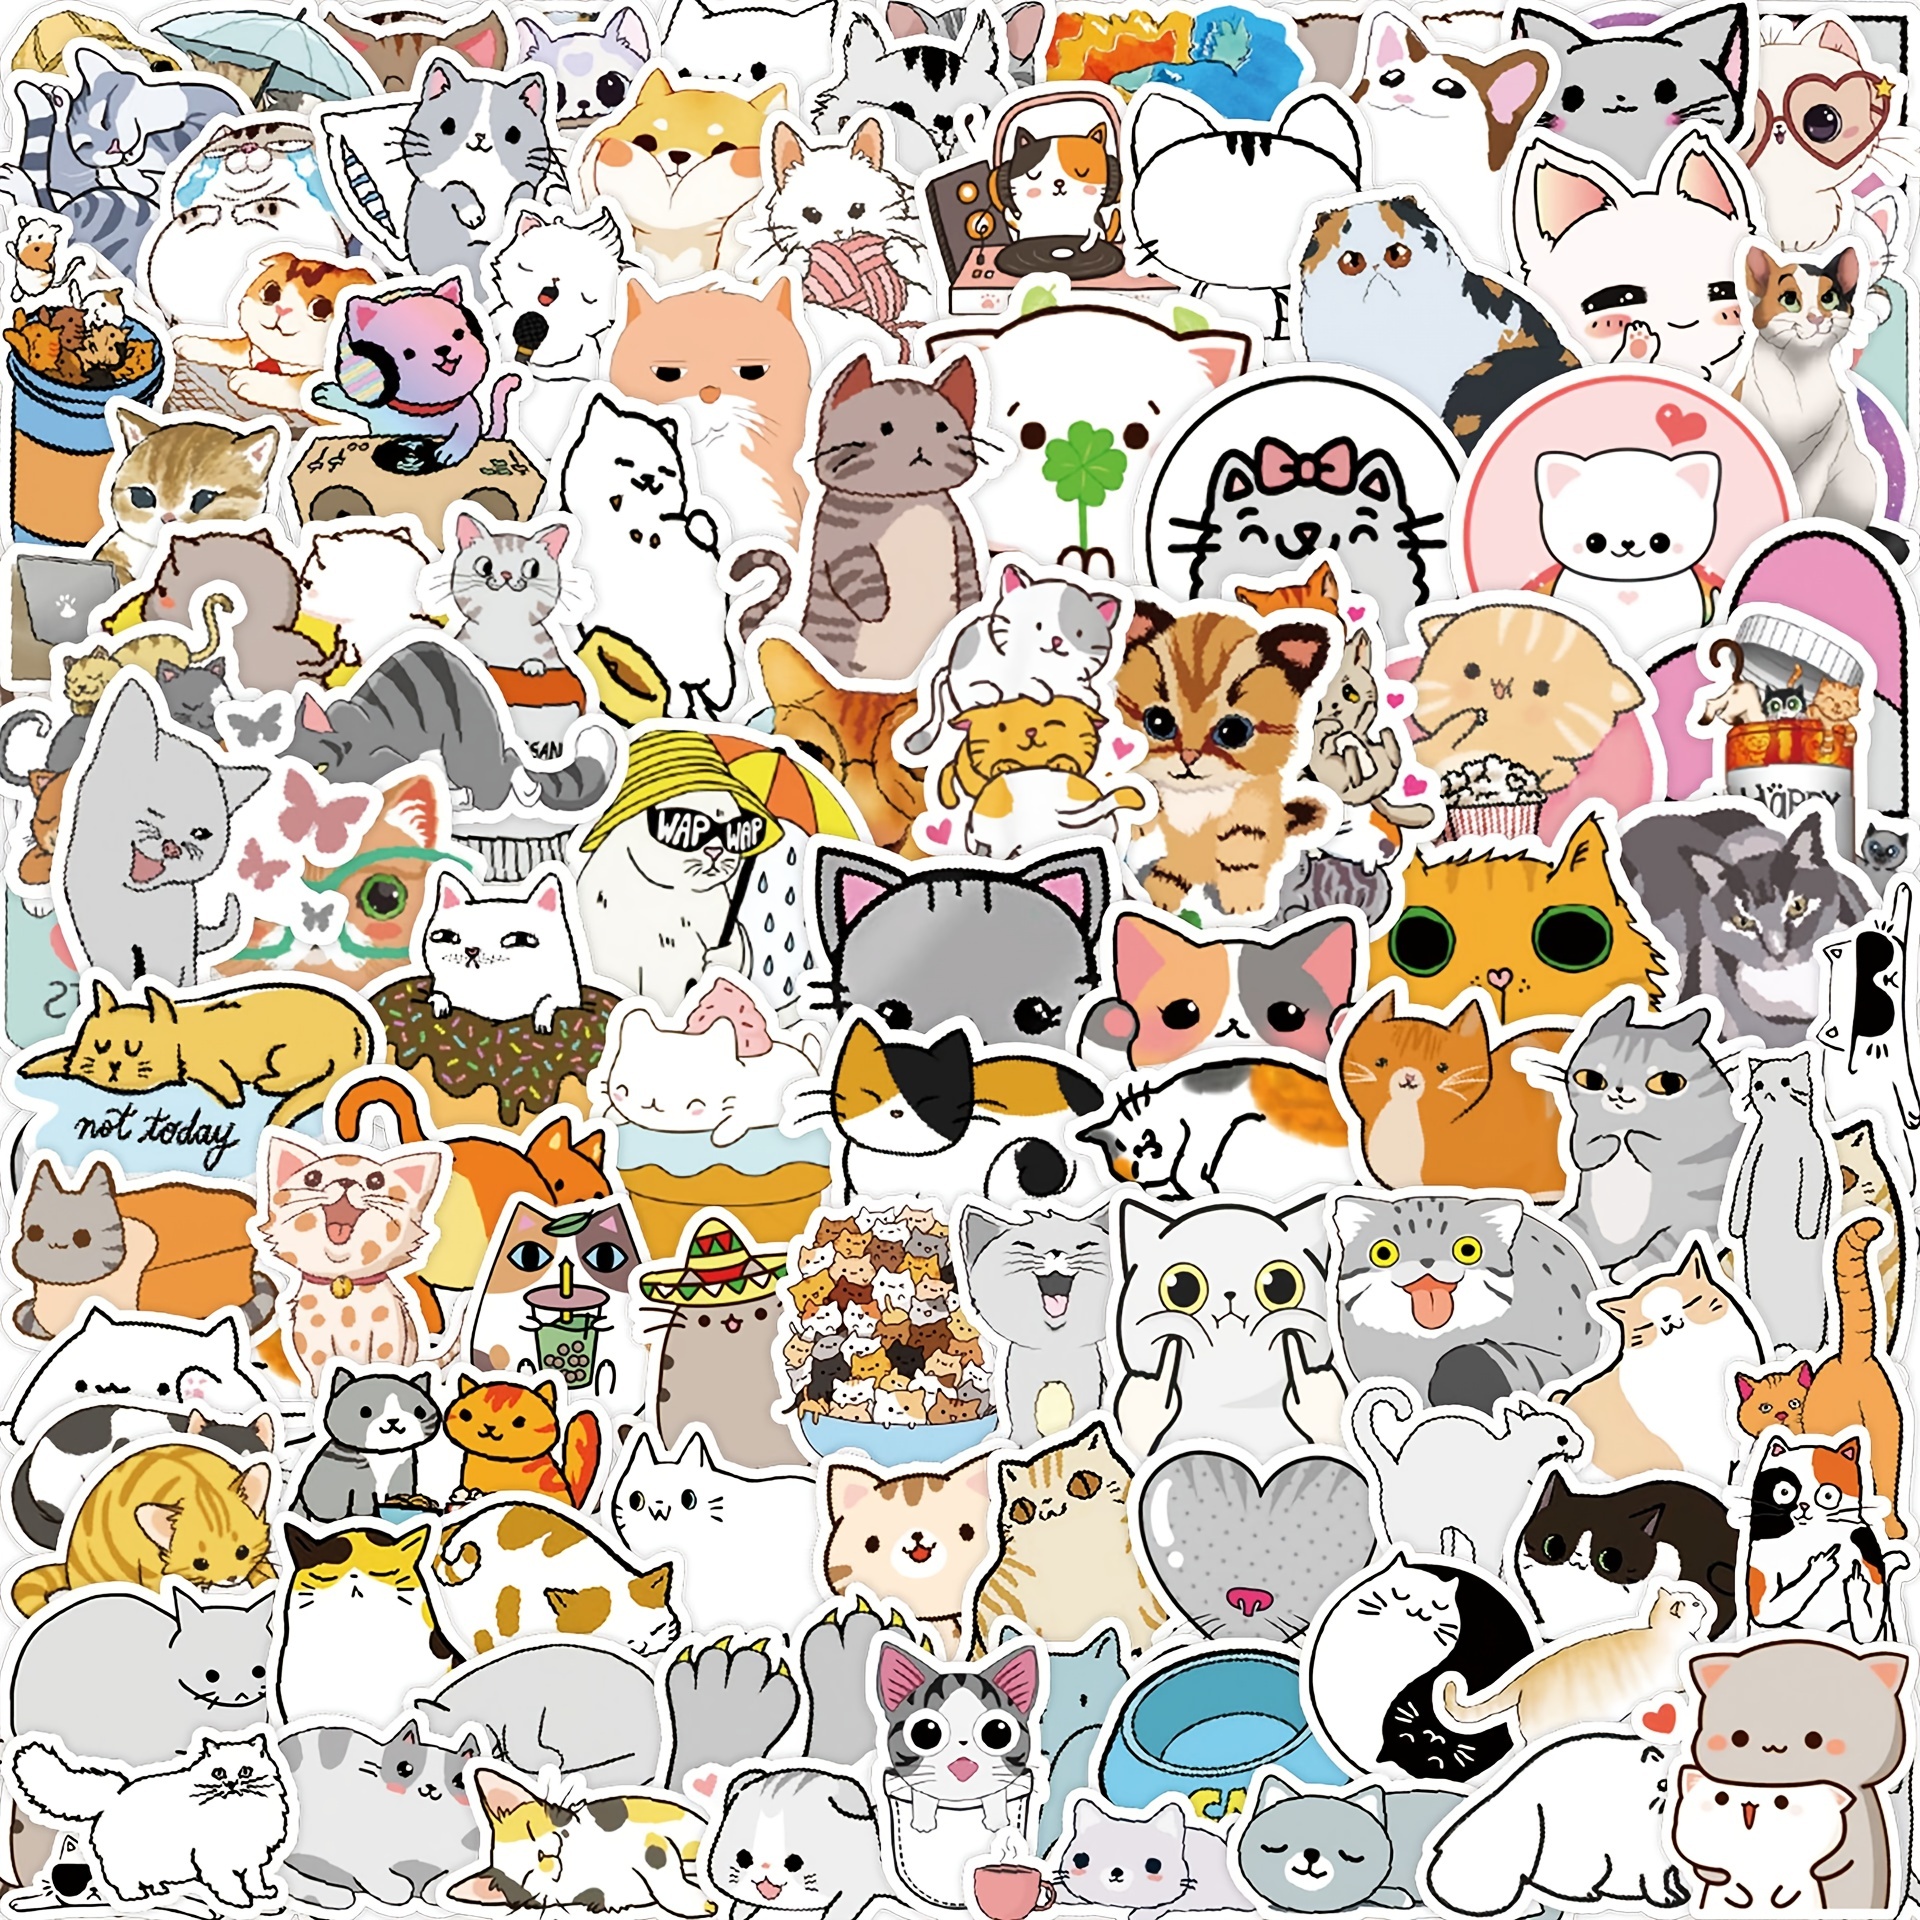 100pcs Cute Cat Stickers for Water Bottle Kitten Kitty Stickers Decals Cat Gifts for Adults Teens Kids Cat Items Decor